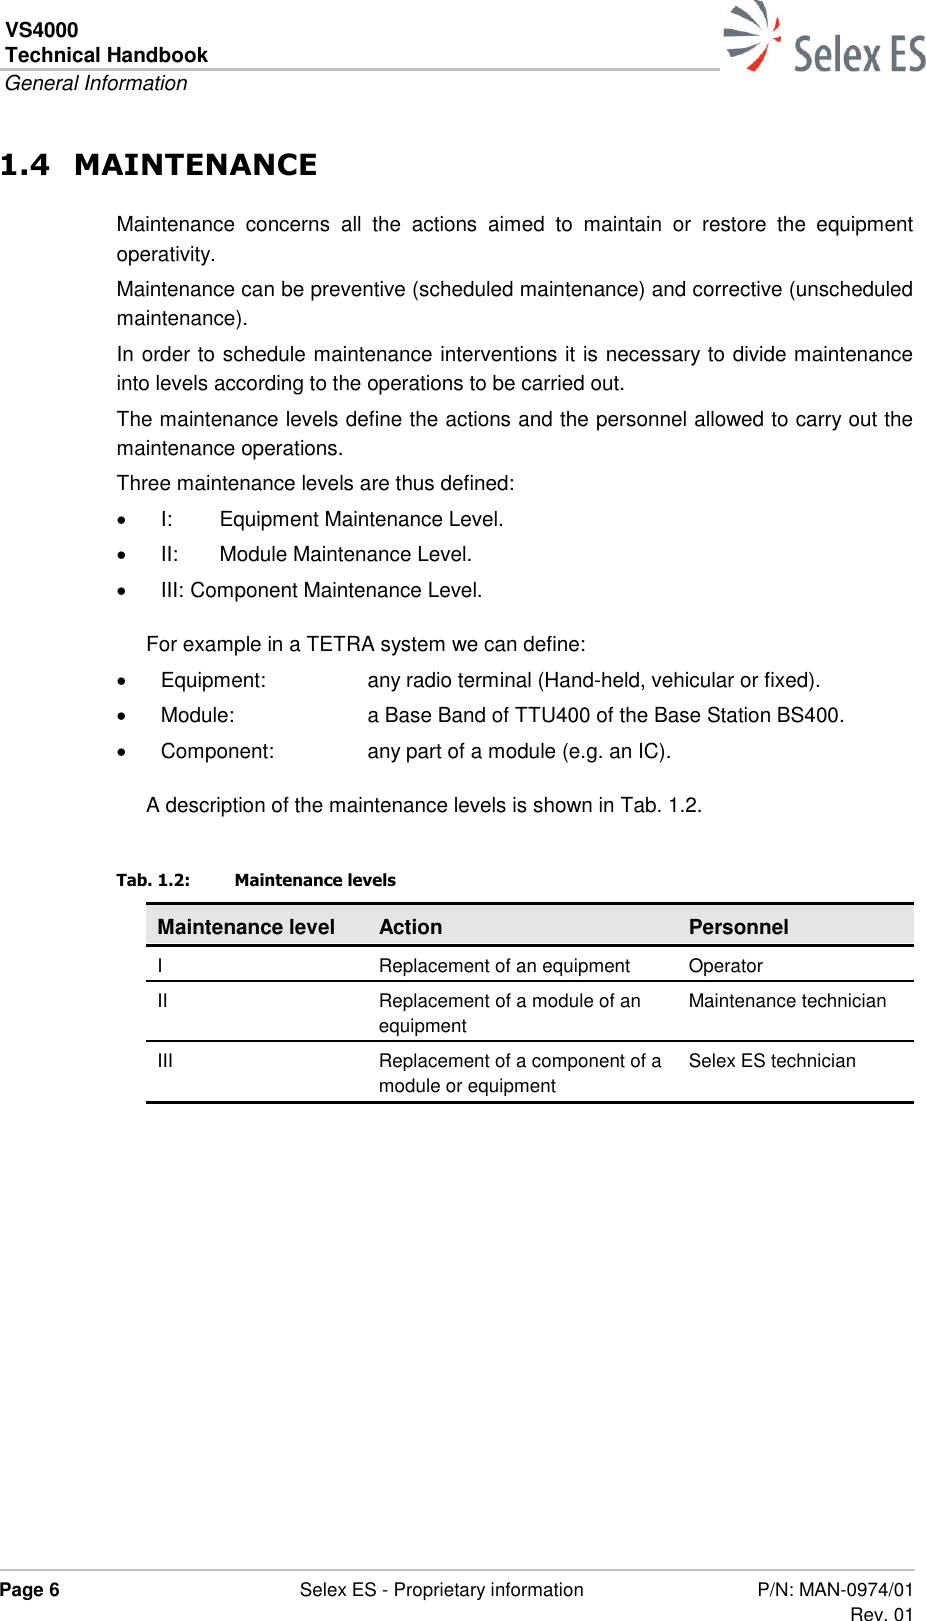 VS4000 Technical Handbook  General Information  Page 6  Selex ES - Proprietary information P/N: MAN-0974/01 Rev. 01  1.4 MAINTENANCE Maintenance  concerns  all  the  actions  aimed  to  maintain  or  restore  the  equipment operativity. Maintenance can be preventive (scheduled maintenance) and corrective (unscheduled maintenance). In order to schedule maintenance interventions it is necessary to divide maintenance into levels according to the operations to be carried out. The maintenance levels define the actions and the personnel allowed to carry out the maintenance operations. Three maintenance levels are thus defined:  I:  Equipment Maintenance Level.  II:  Module Maintenance Level.  III: Component Maintenance Level. For example in a TETRA system we can define:   Equipment:  any radio terminal (Hand-held, vehicular or fixed).   Module:  a Base Band of TTU400 of the Base Station BS400.   Component:  any part of a module (e.g. an IC). A description of the maintenance levels is shown in Tab. 1.2. Tab. 1.2:  Maintenance levels Maintenance level Action Personnel I Replacement of an equipment Operator II Replacement of a module of an equipment Maintenance technician III Replacement of a component of a module or equipment Selex ES technician   